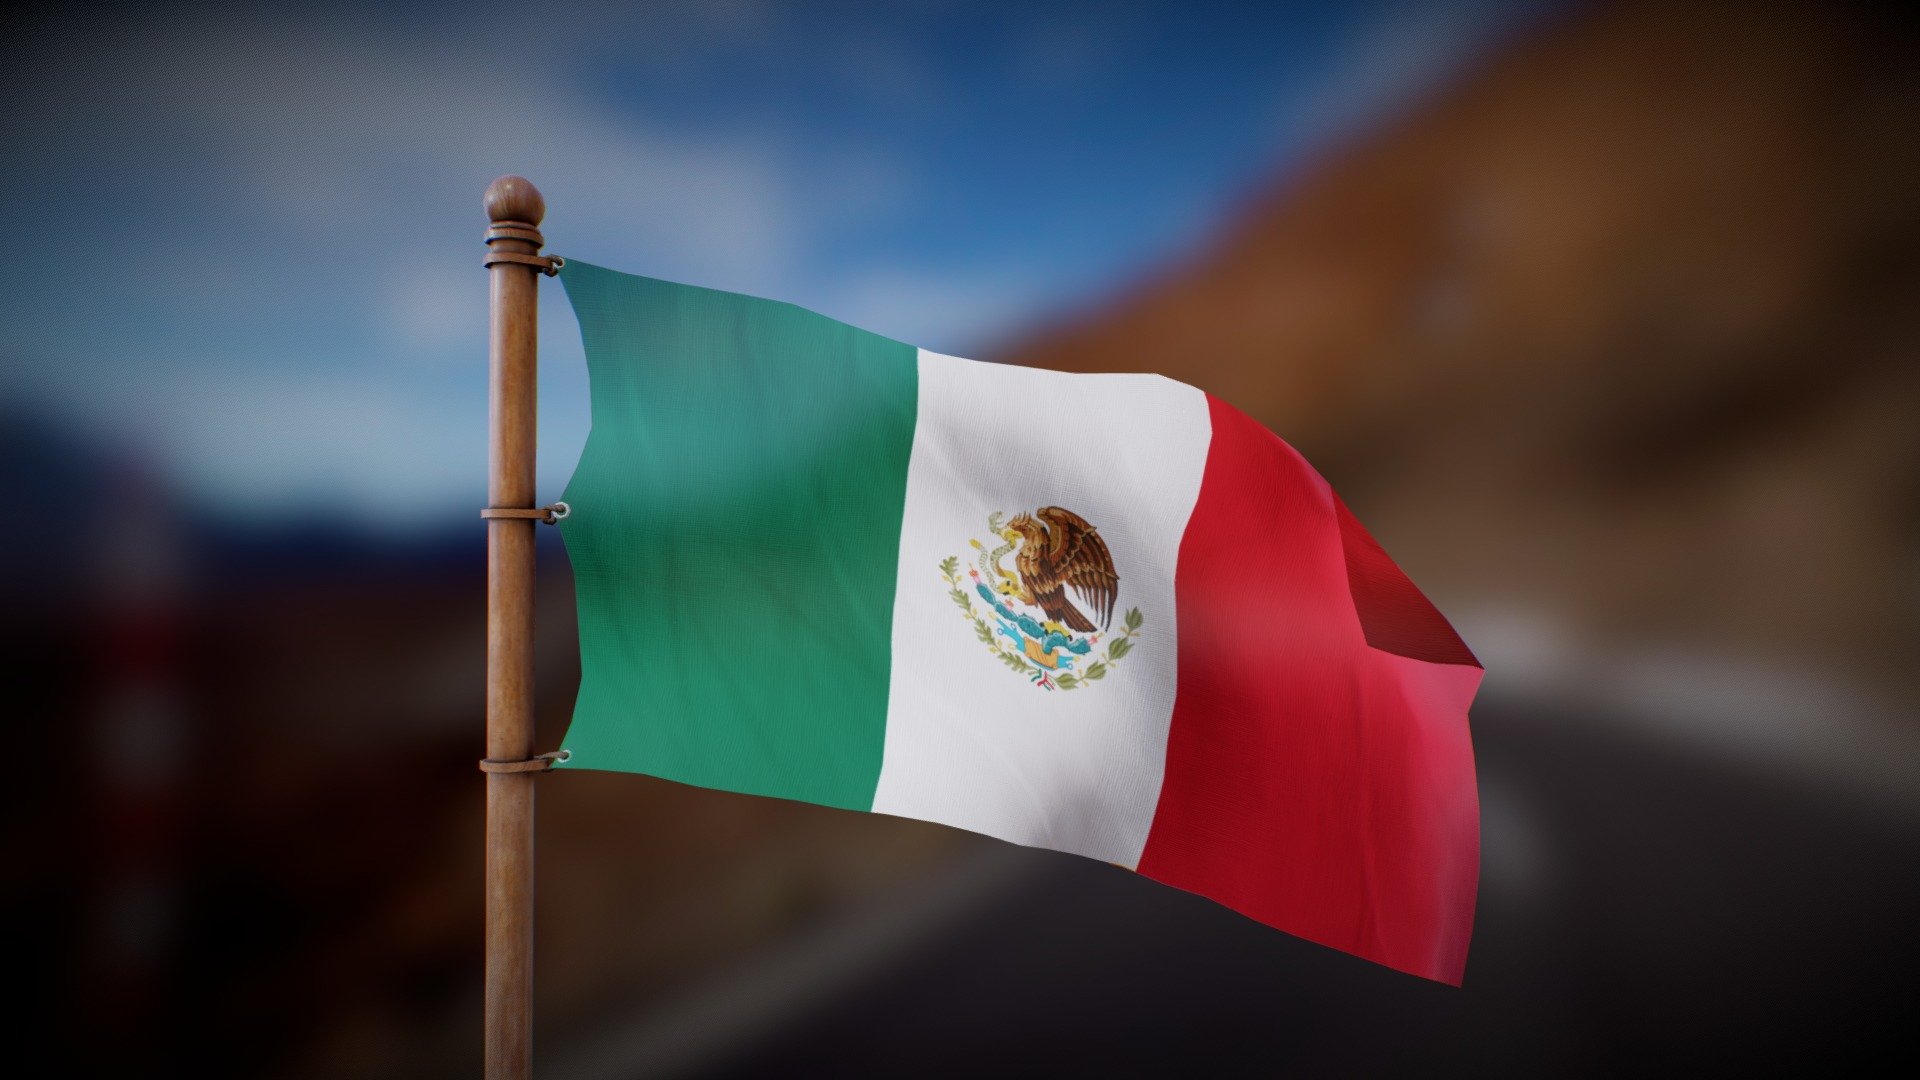 Flag waving in the wind in a looped animation

Joint Animation, perfect for any purpose
4K PBR textures

Feel free to DM me for anu question of custom requests :) - Mexico Flag - Wind Animated Loop - Buy Royalty Free 3D model by Deftroy 3d model